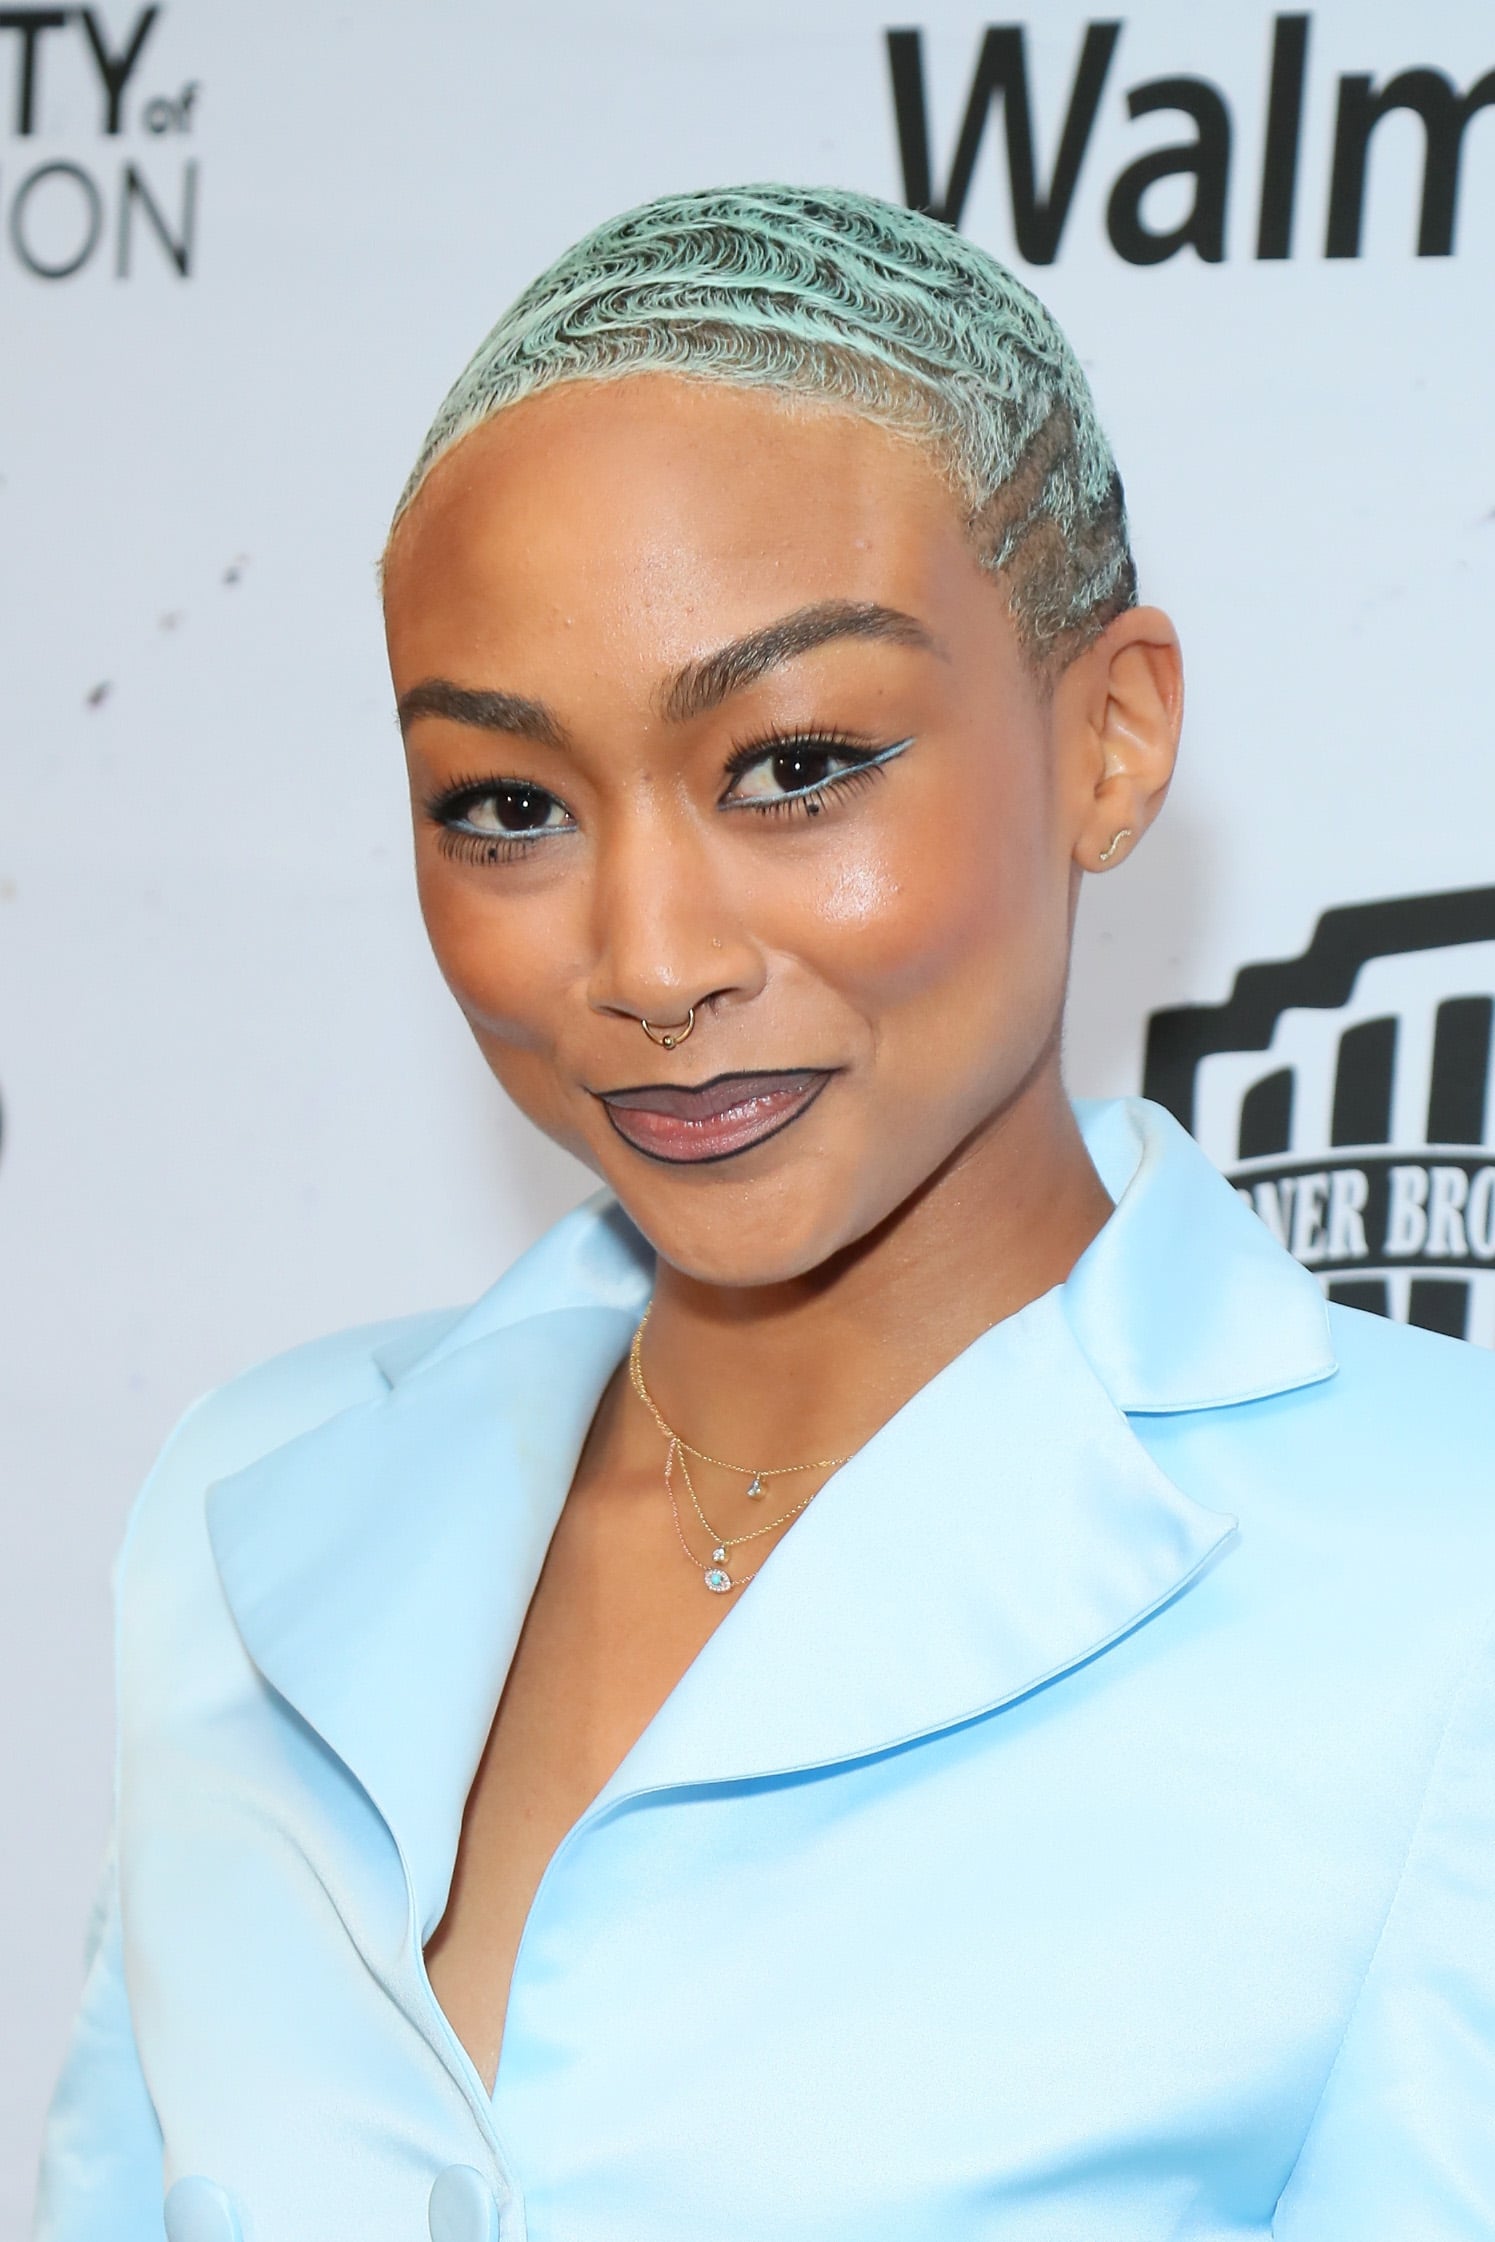 Let’s All Admire These Jaw Dropping Hairstyles At ESSENCE’s 2019 Black Women In Hollywood